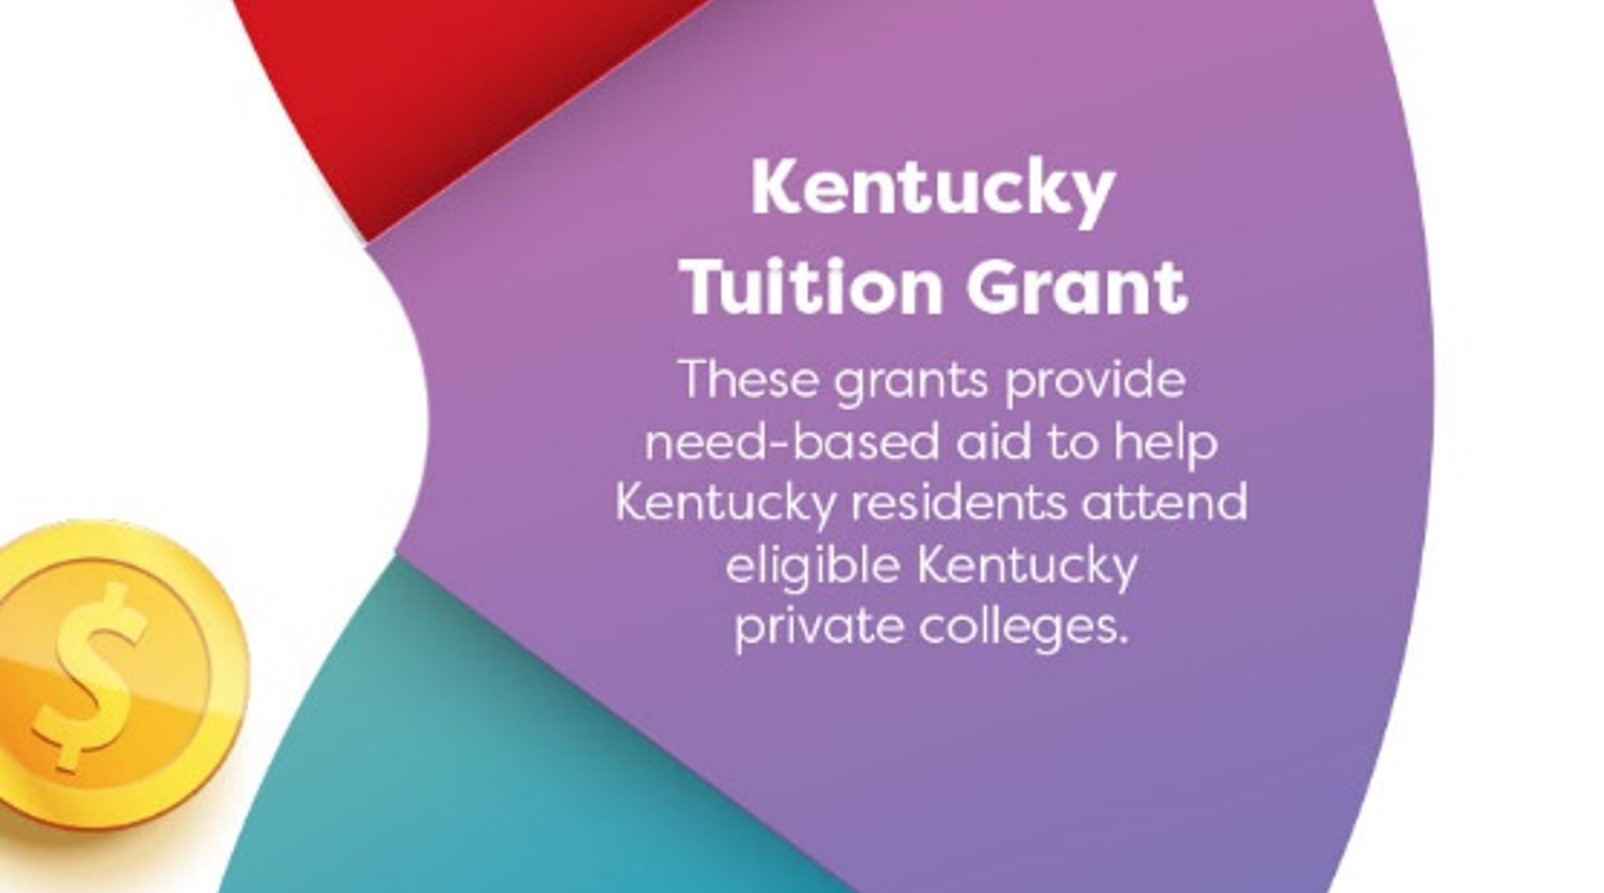 KY Tuition Grant